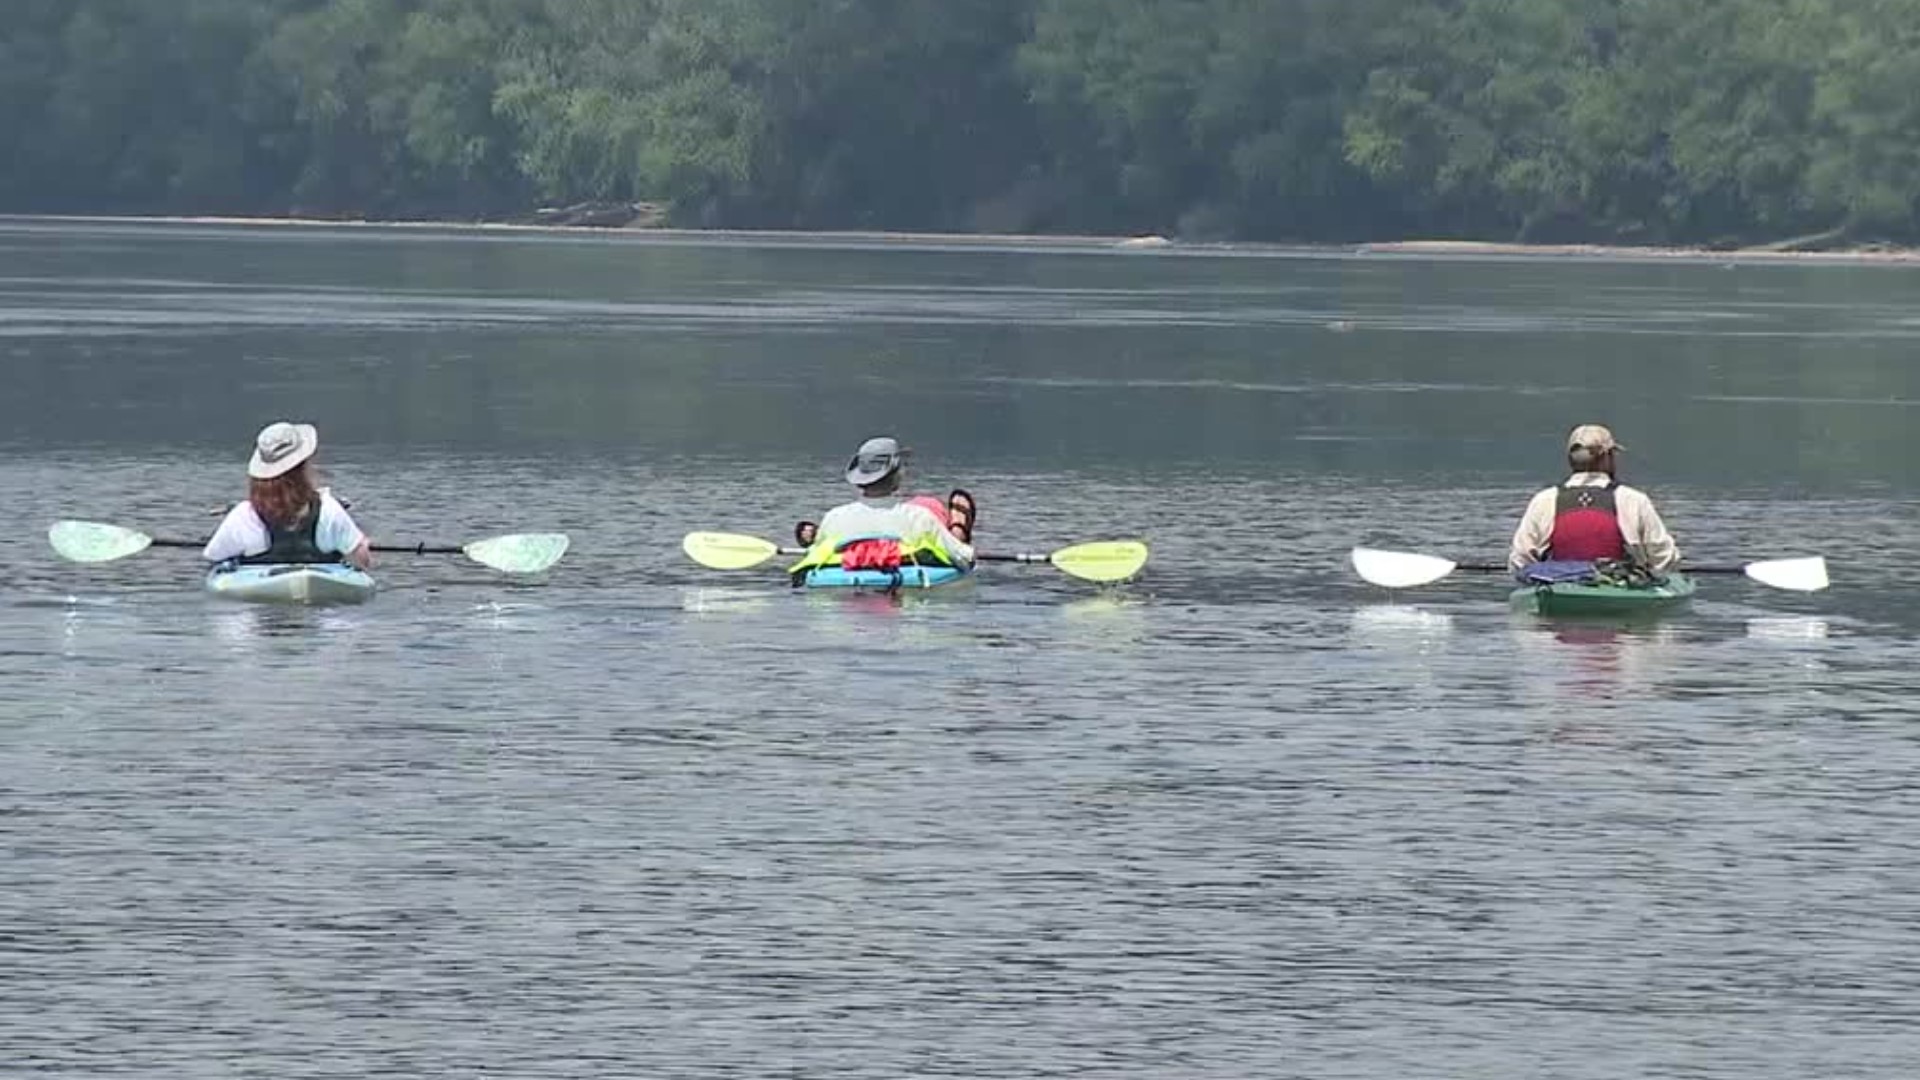 Three friends from Selinsgrove are kayaking 444 miles of the Susquehanna River.  We caught up with them in Danville.